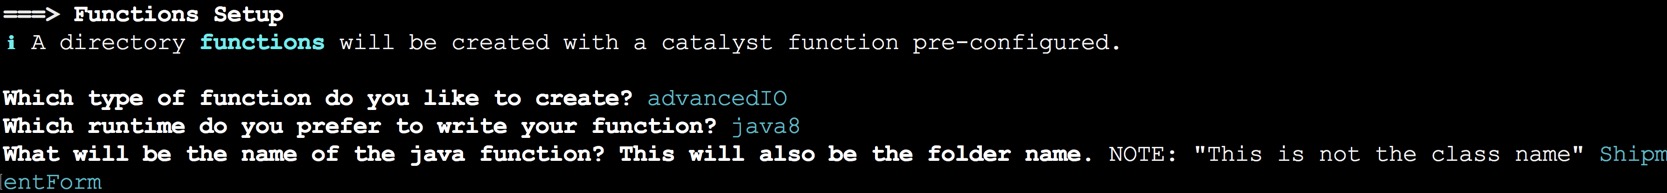 Initialize functions- Java Functions